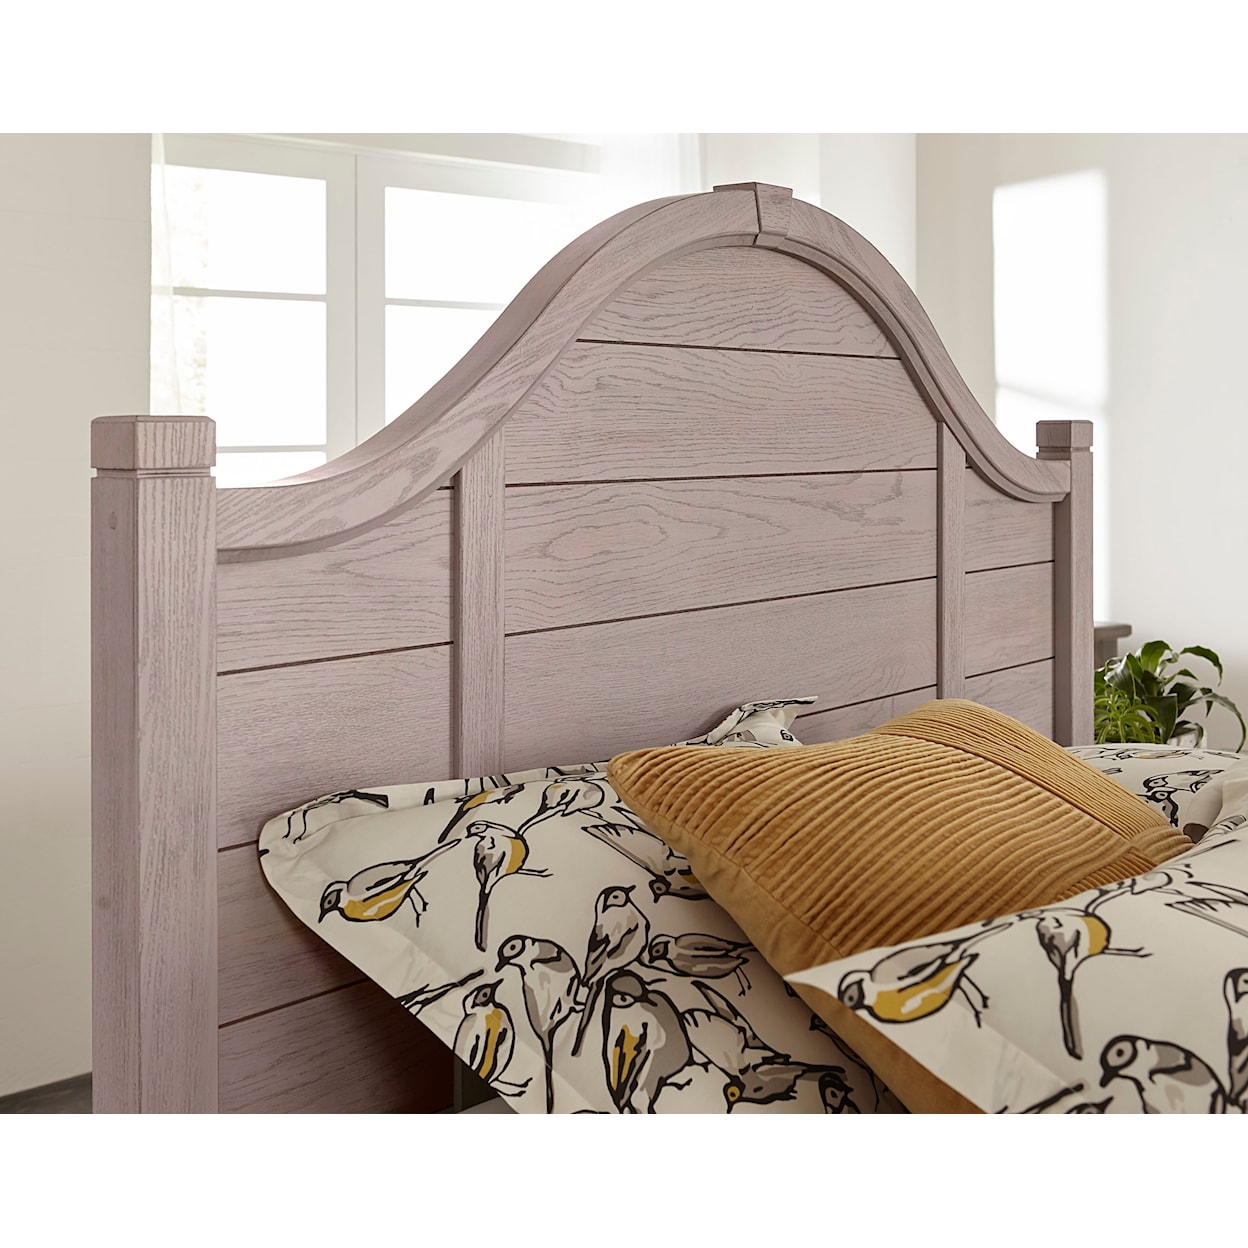 Vaughan-Bassett Bungalow King Arched Bed